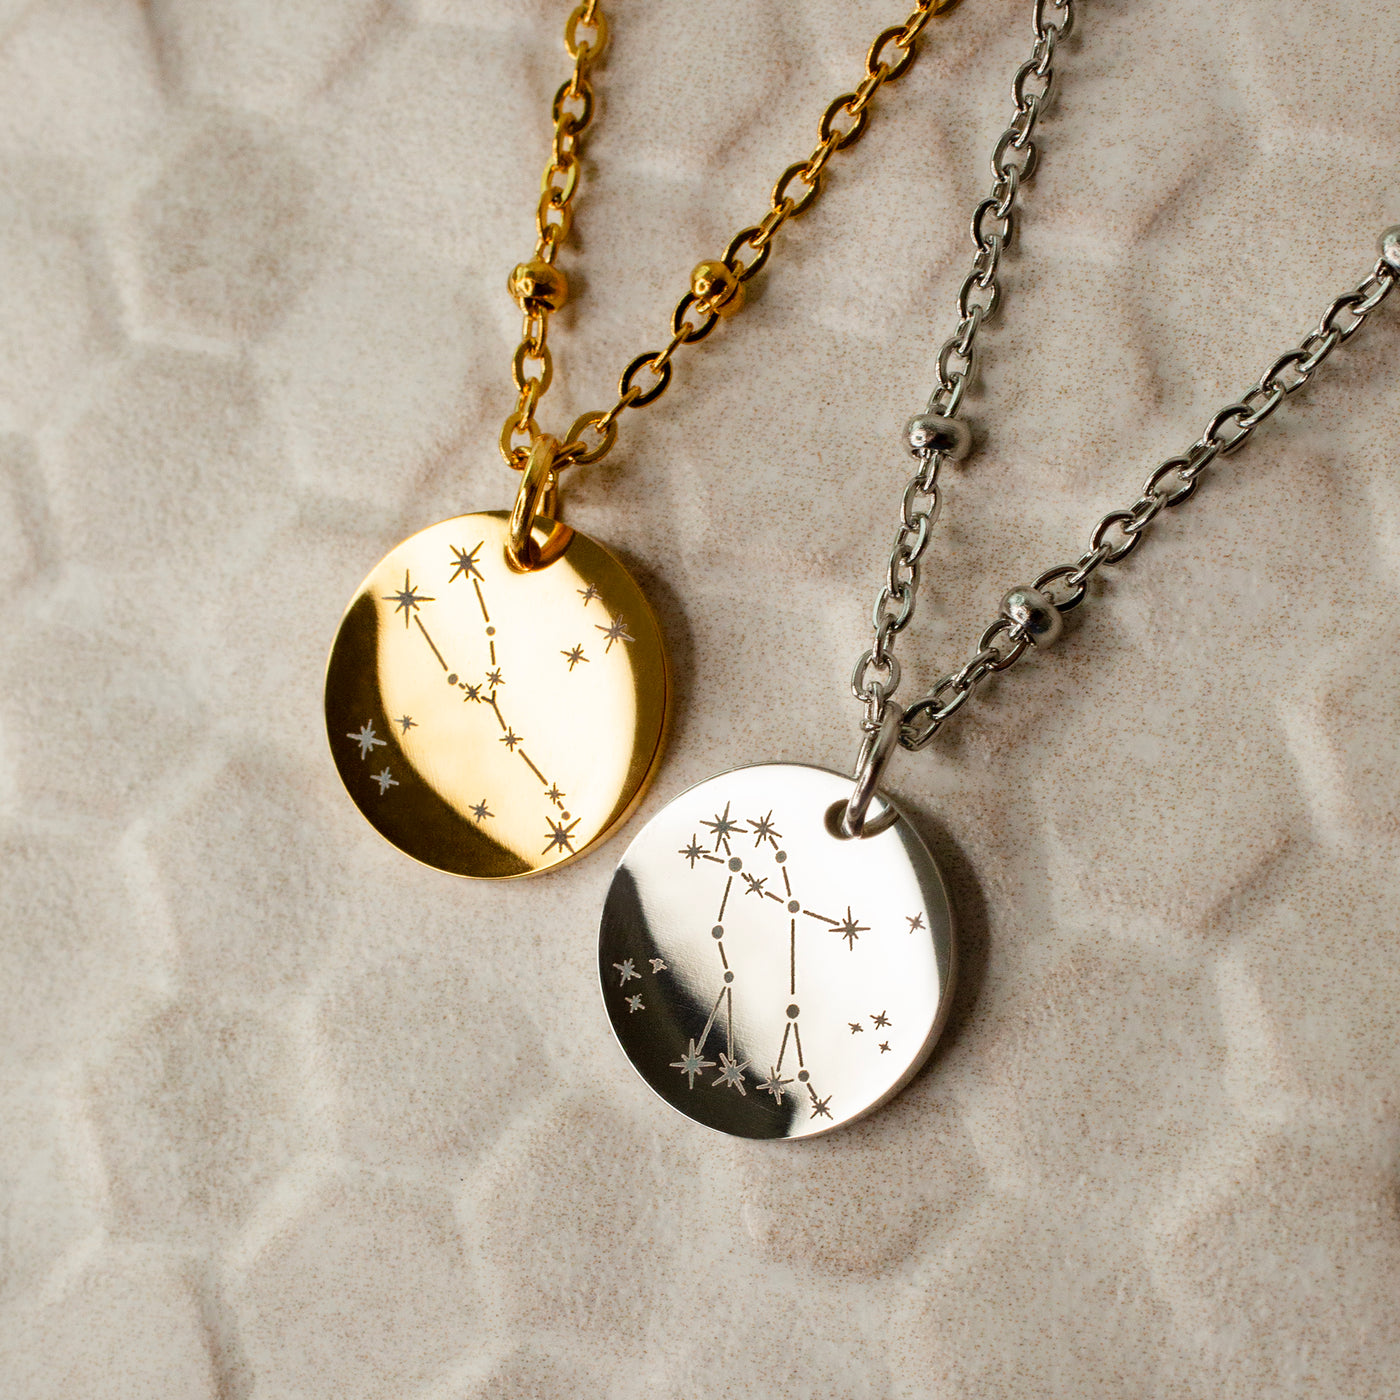 Extra Charm for Constellation Engraved Pendant Necklace - Silver or Gold